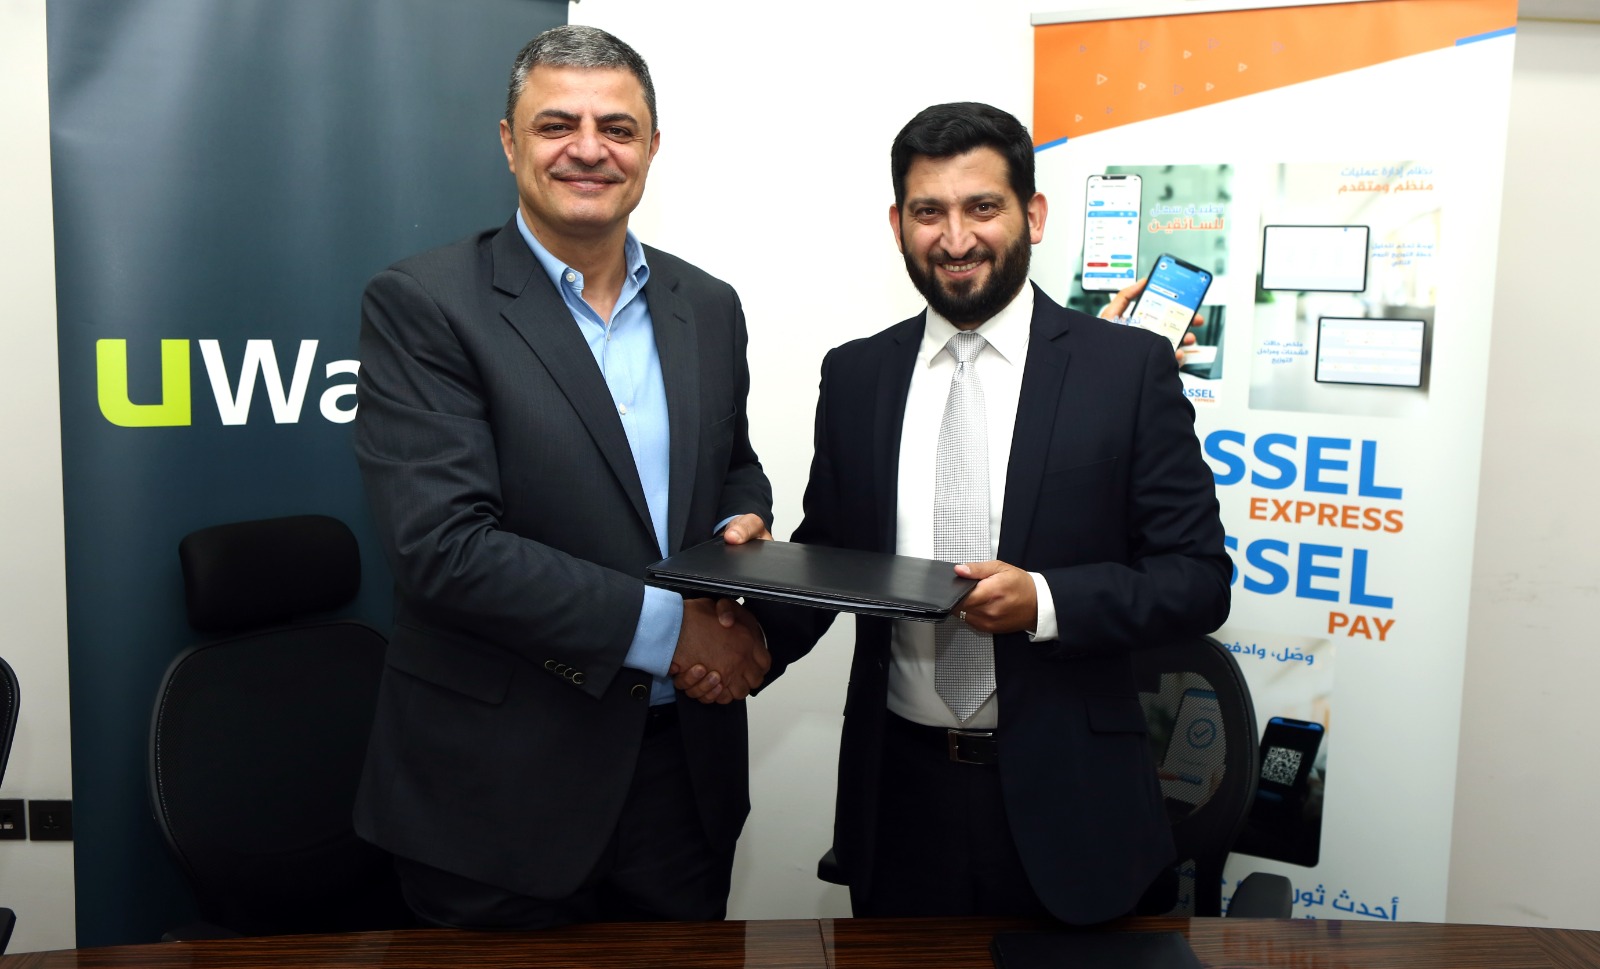 Partnership Agreement Signed between UWallet and Wassel Express